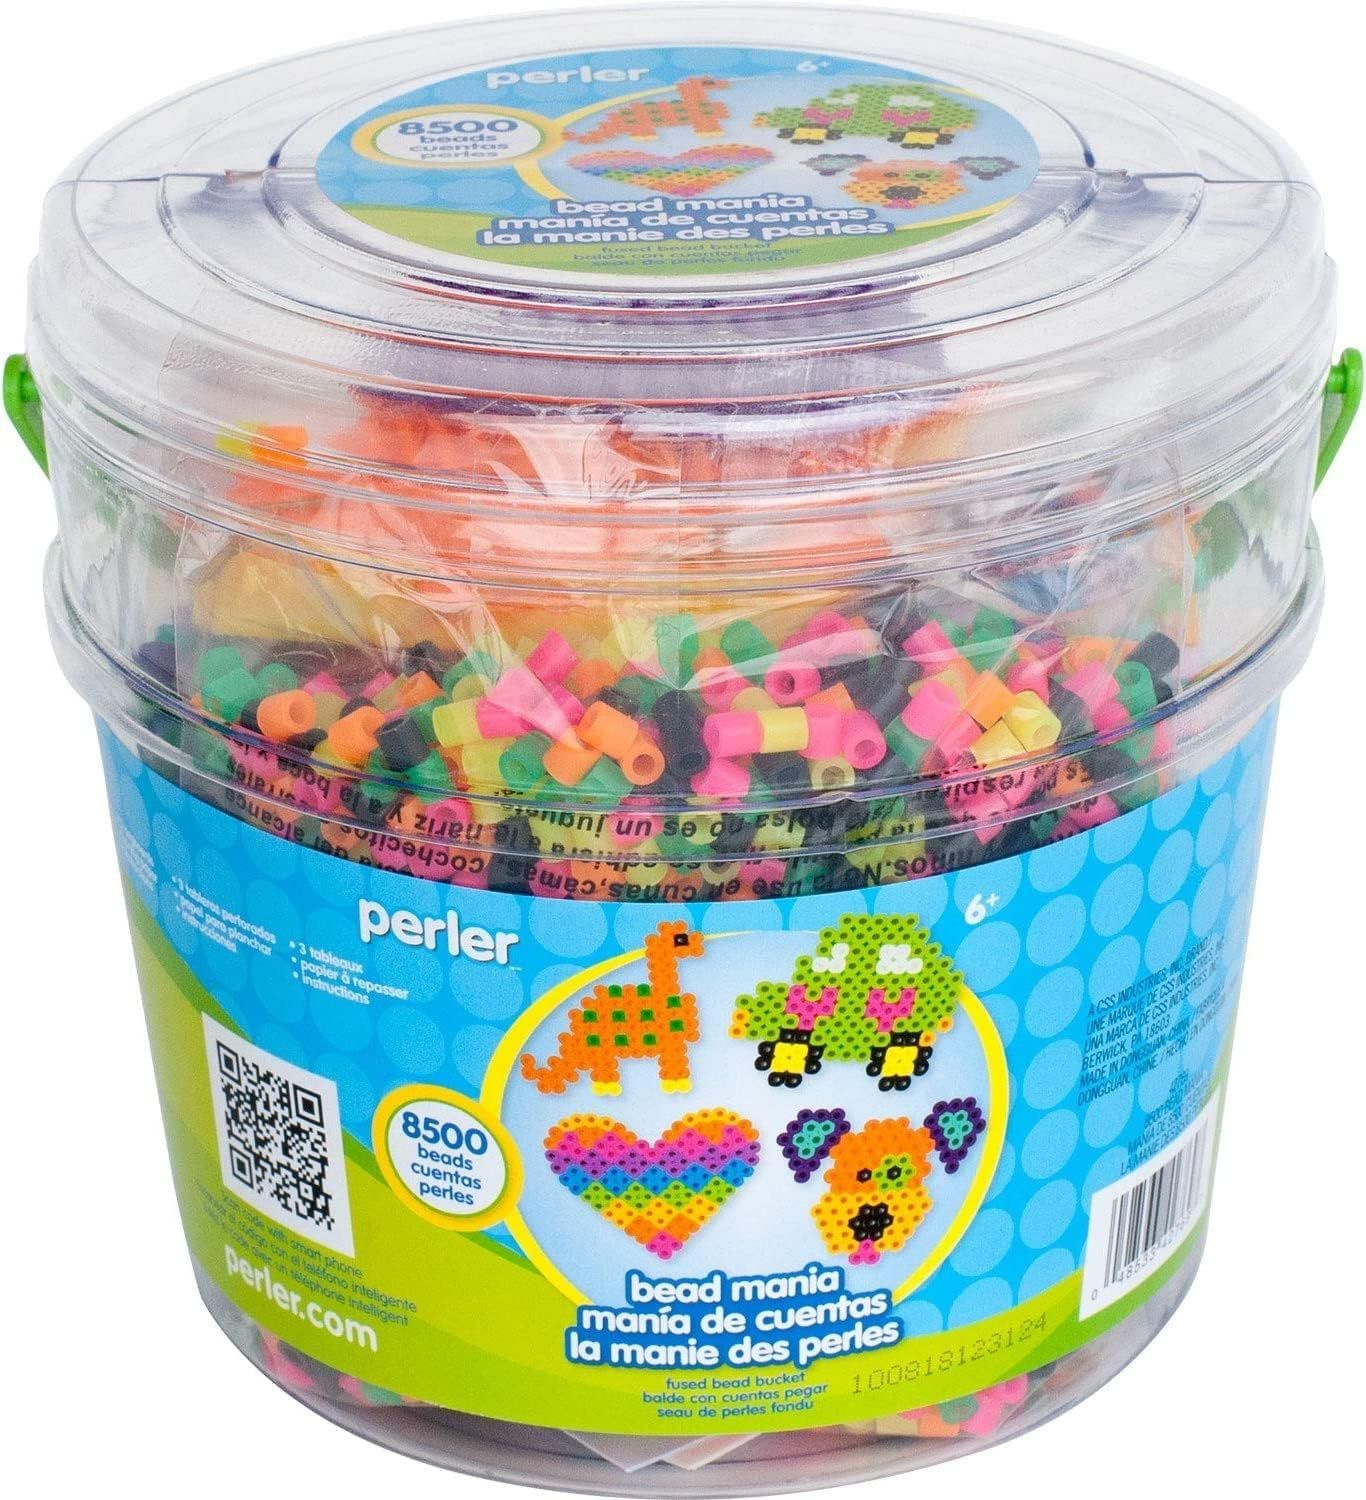 Perler Fuse Activity Bucket for Arts and Crafts, 8500 Beads, One Size, Multicolor | Amazon (US)